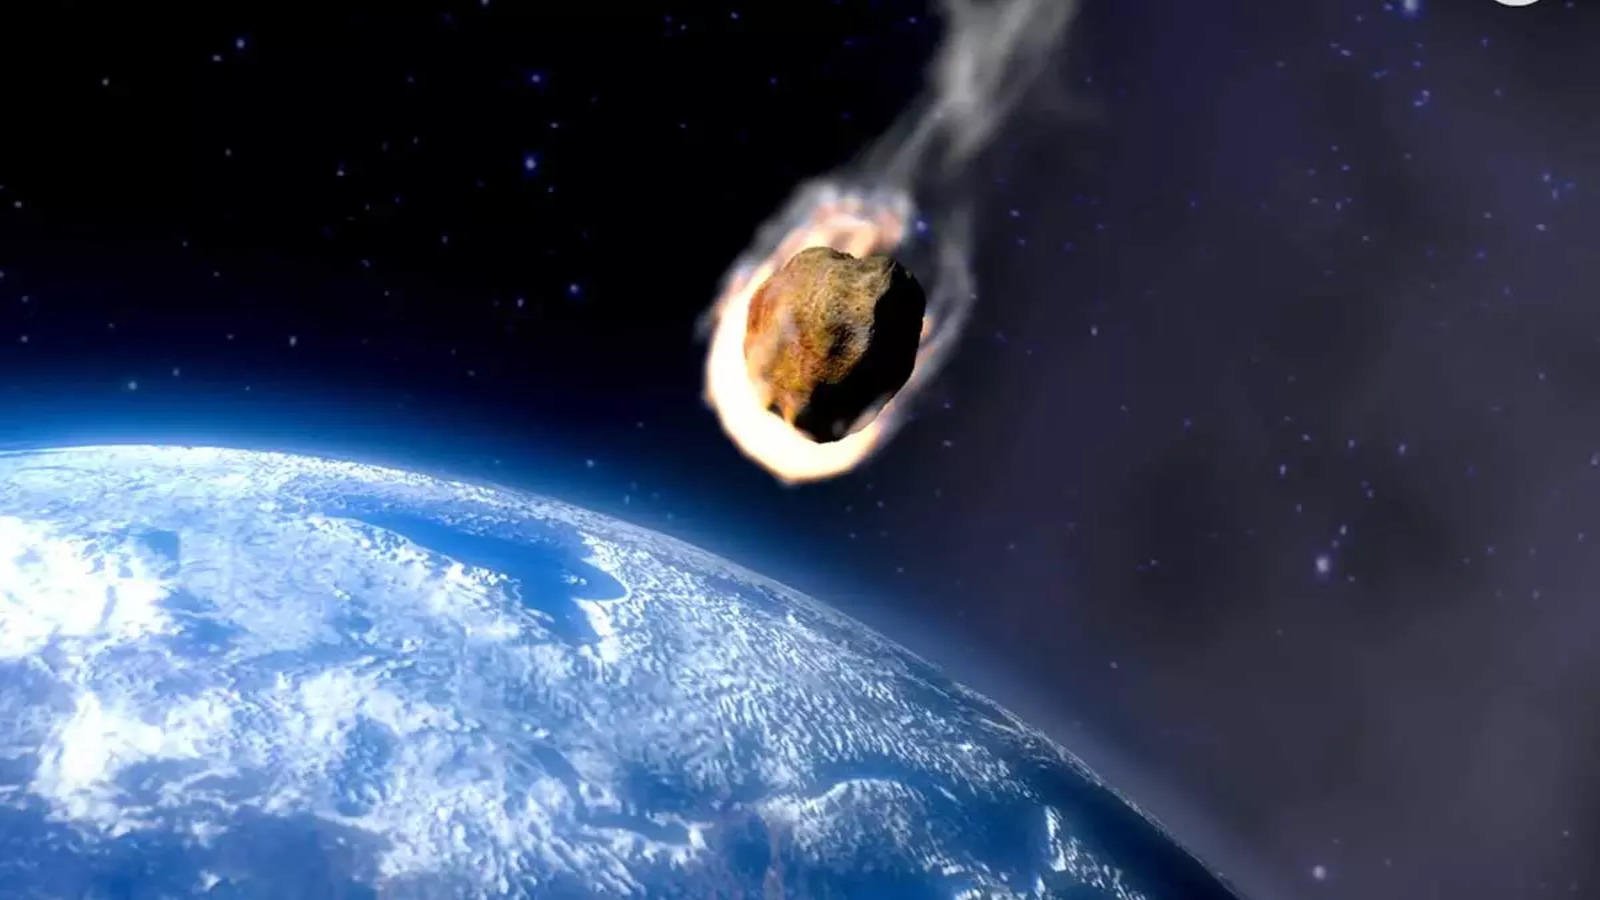 Five asteroid will pass close to Earth